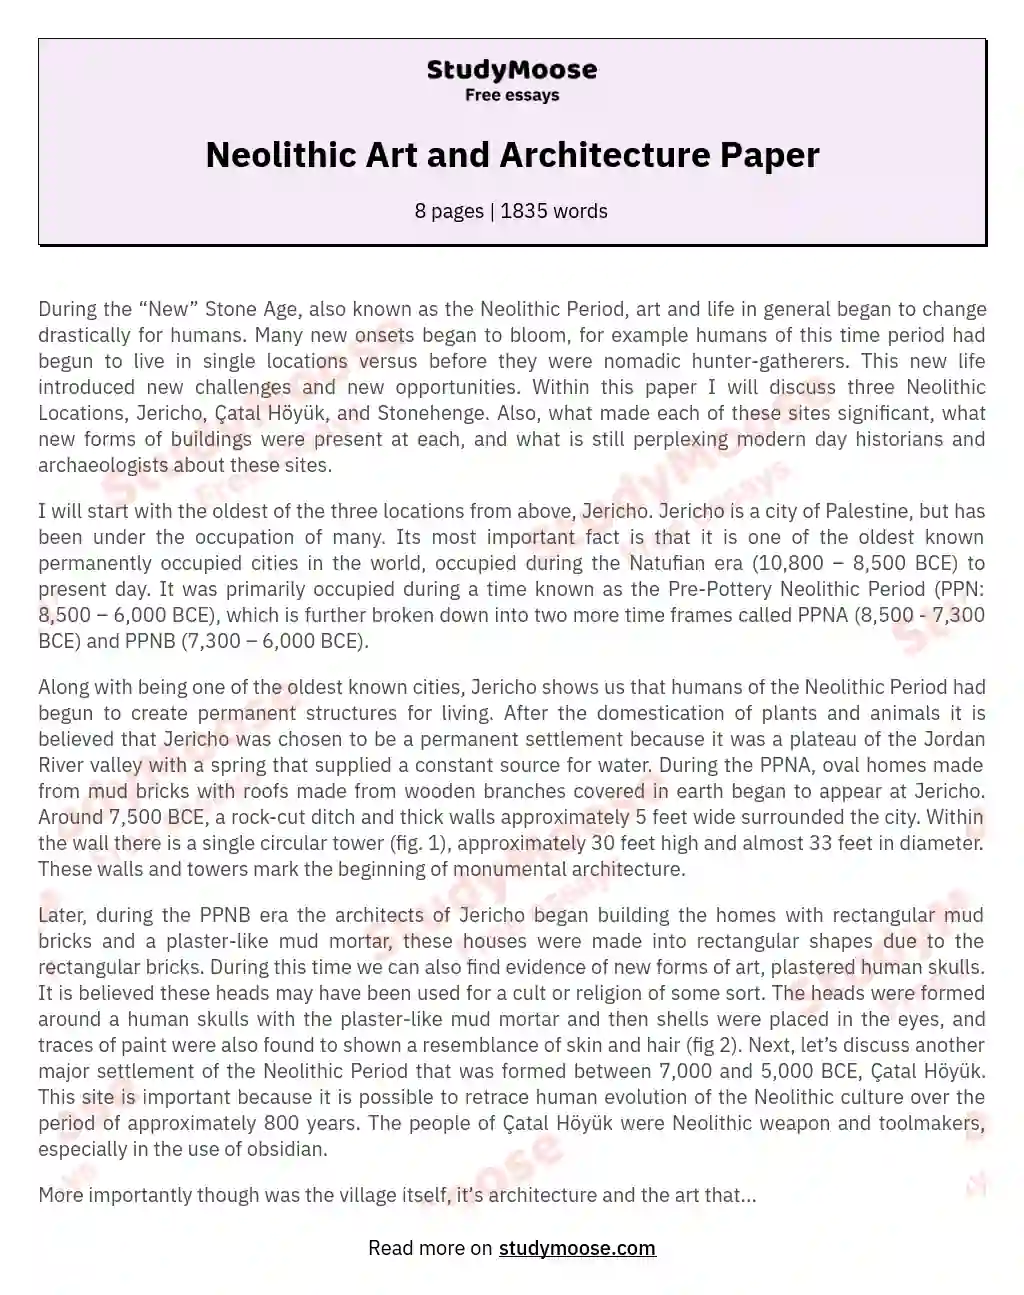 Neolithic Art and Architecture Paper essay